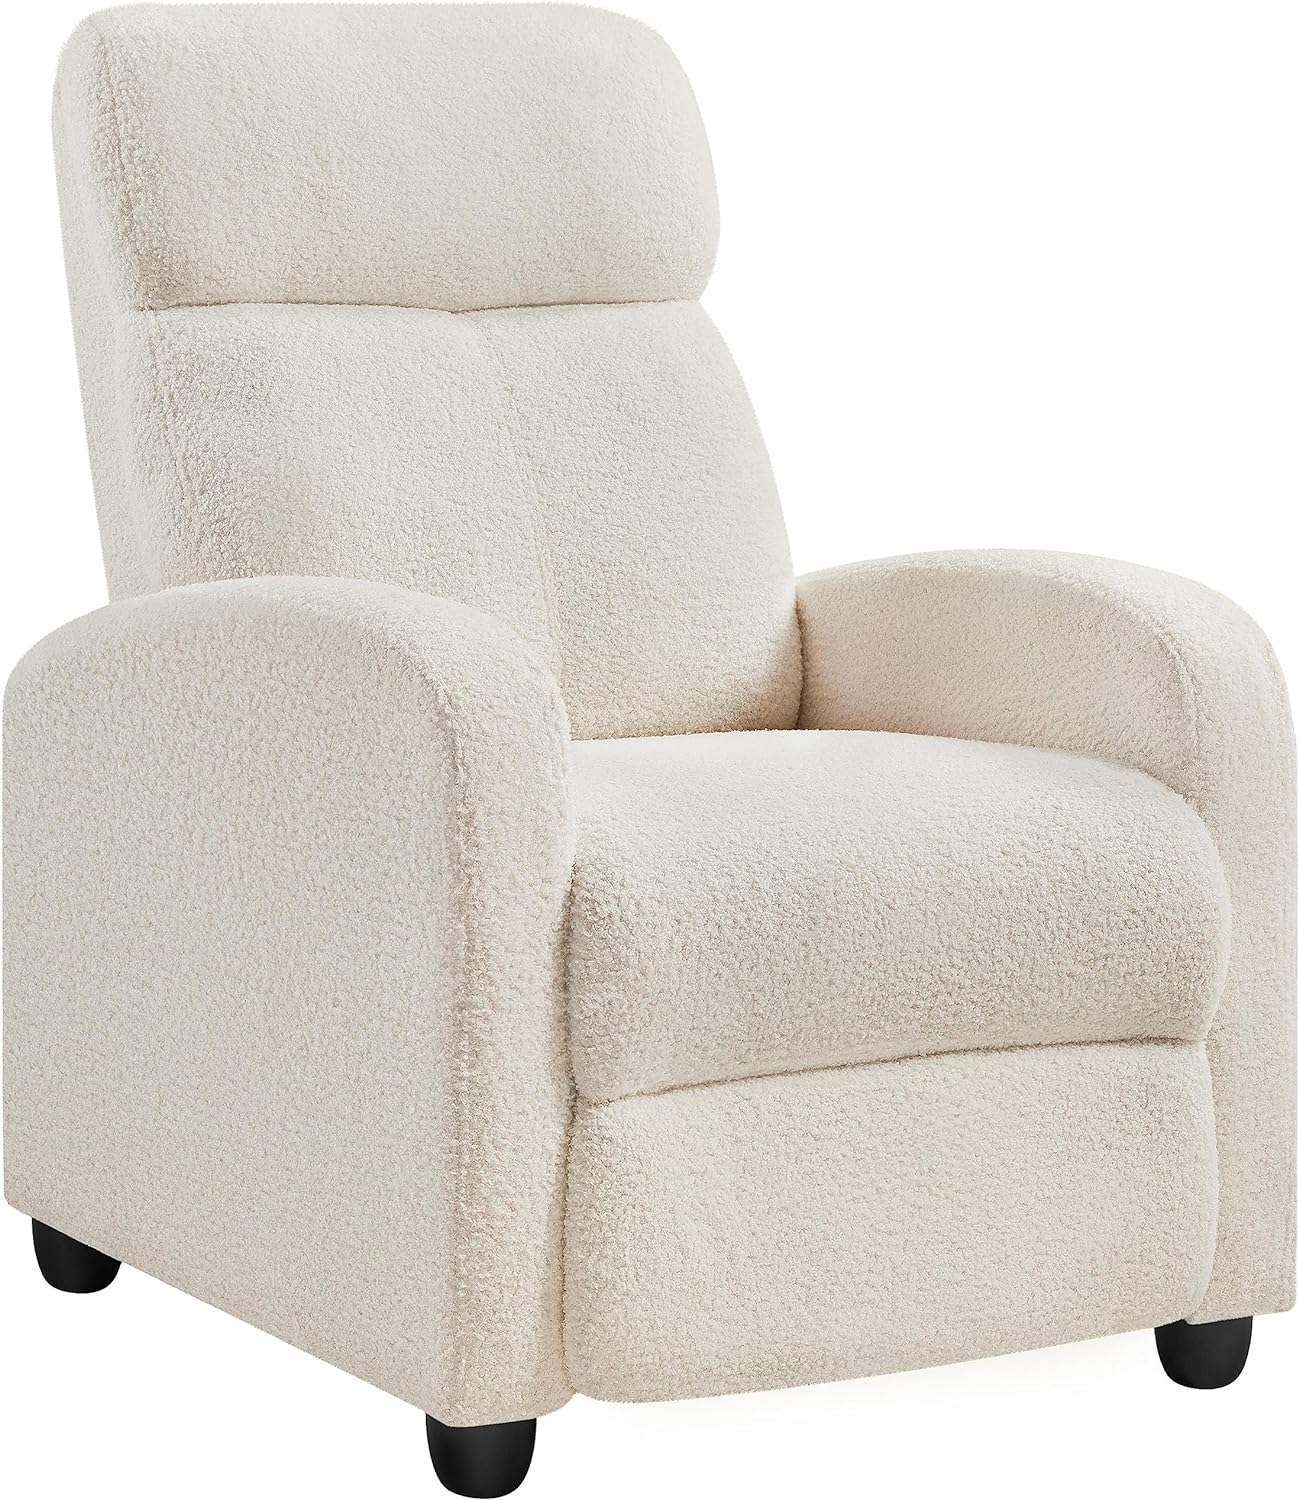 Fabric Recliner Chair Single Sofa Home Theater Seatting Adjustable Modern Single Reclining Living Room Bedroom Ivory